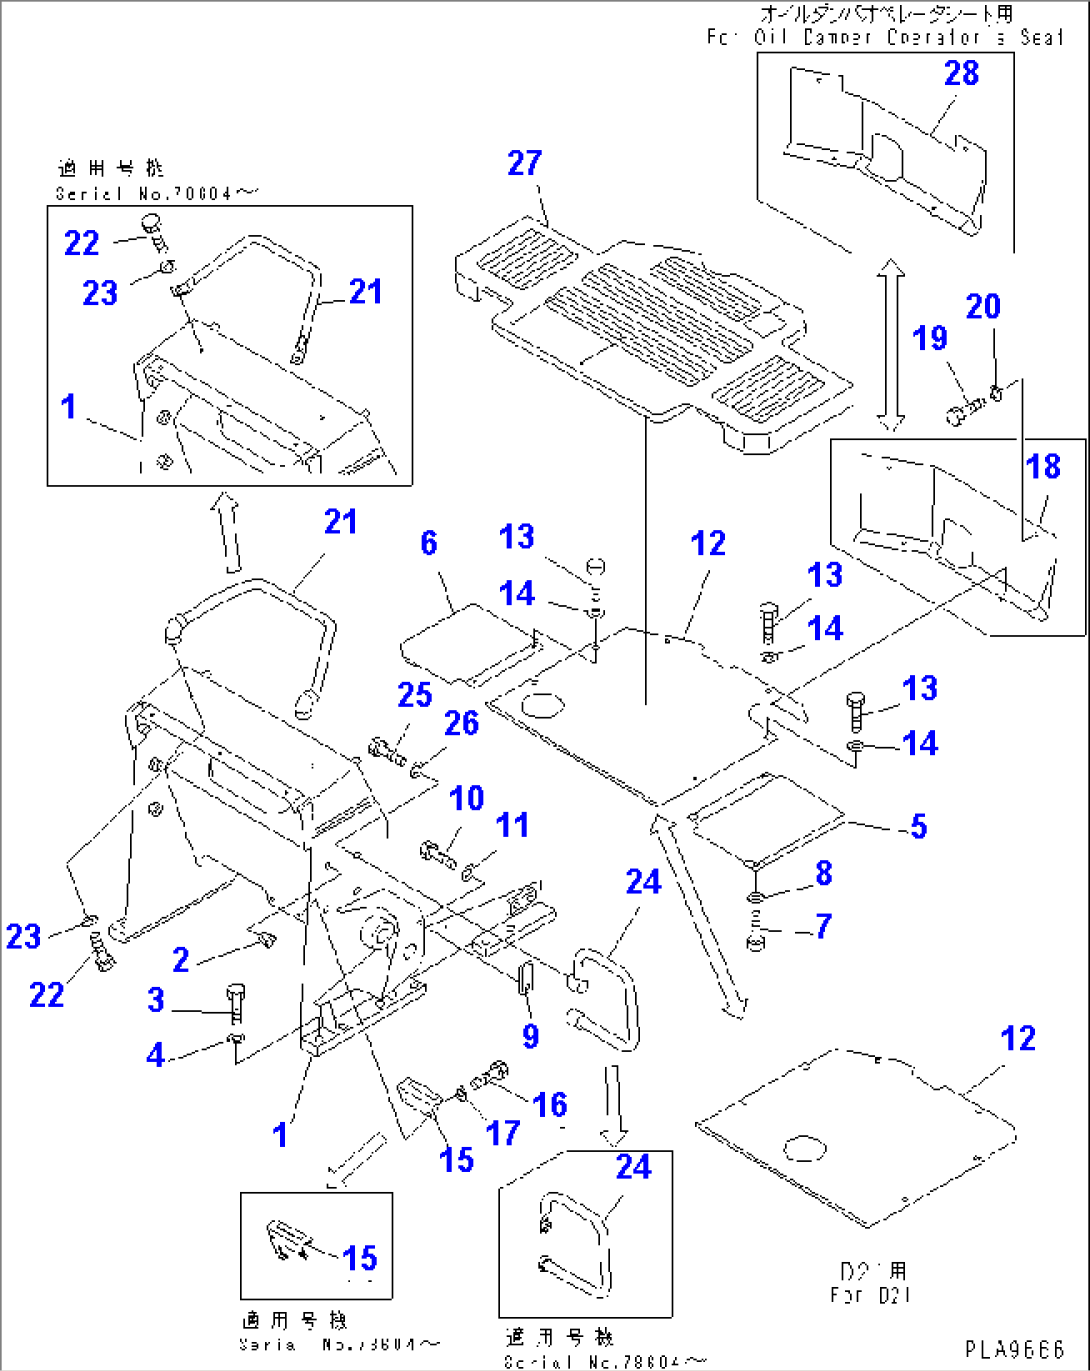 LOADER FRAME AND FLOOR PLATE (FOR MONO LEVER STEERING)